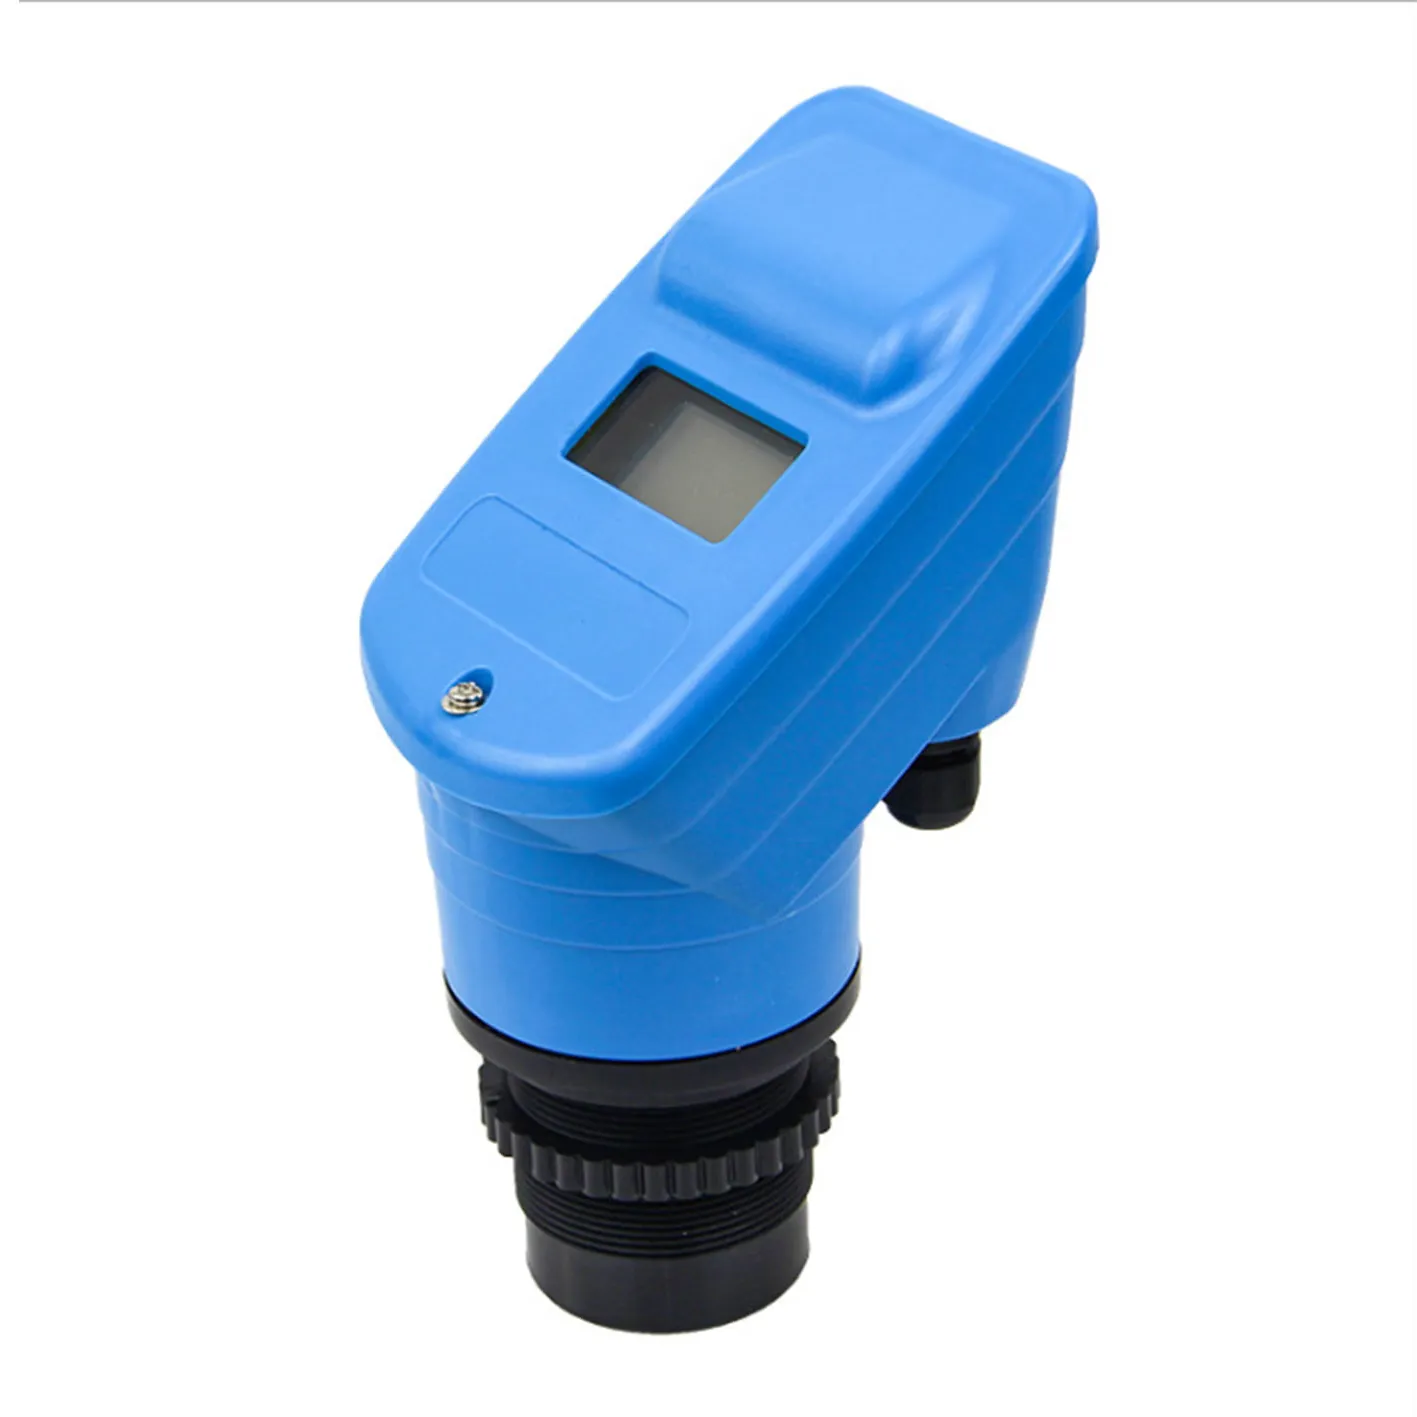 Ultrasonic Level Sensor Two Wires No Contact Liquid Level Gauge For Water Tank Level Meter